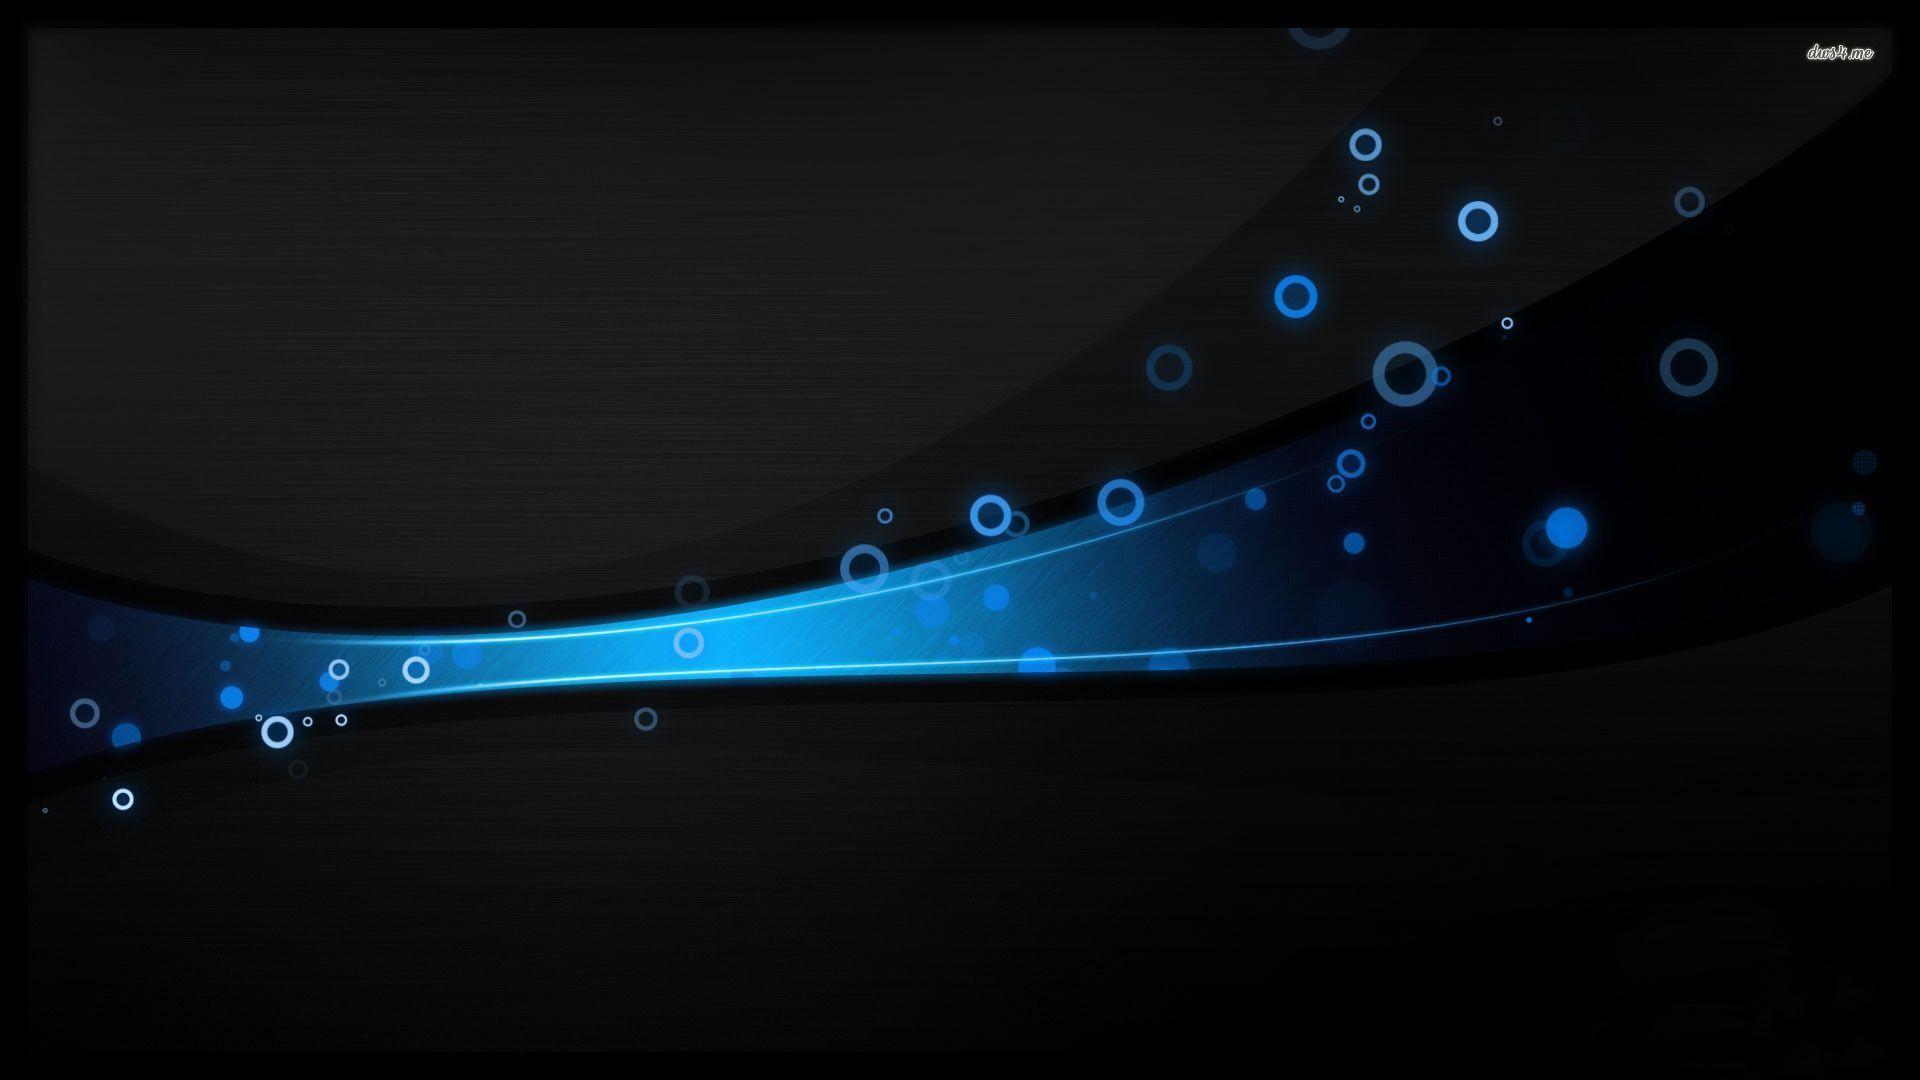 Blurry Blue Circles And Waves Abstract Wallpaper 1680x1050 px Free